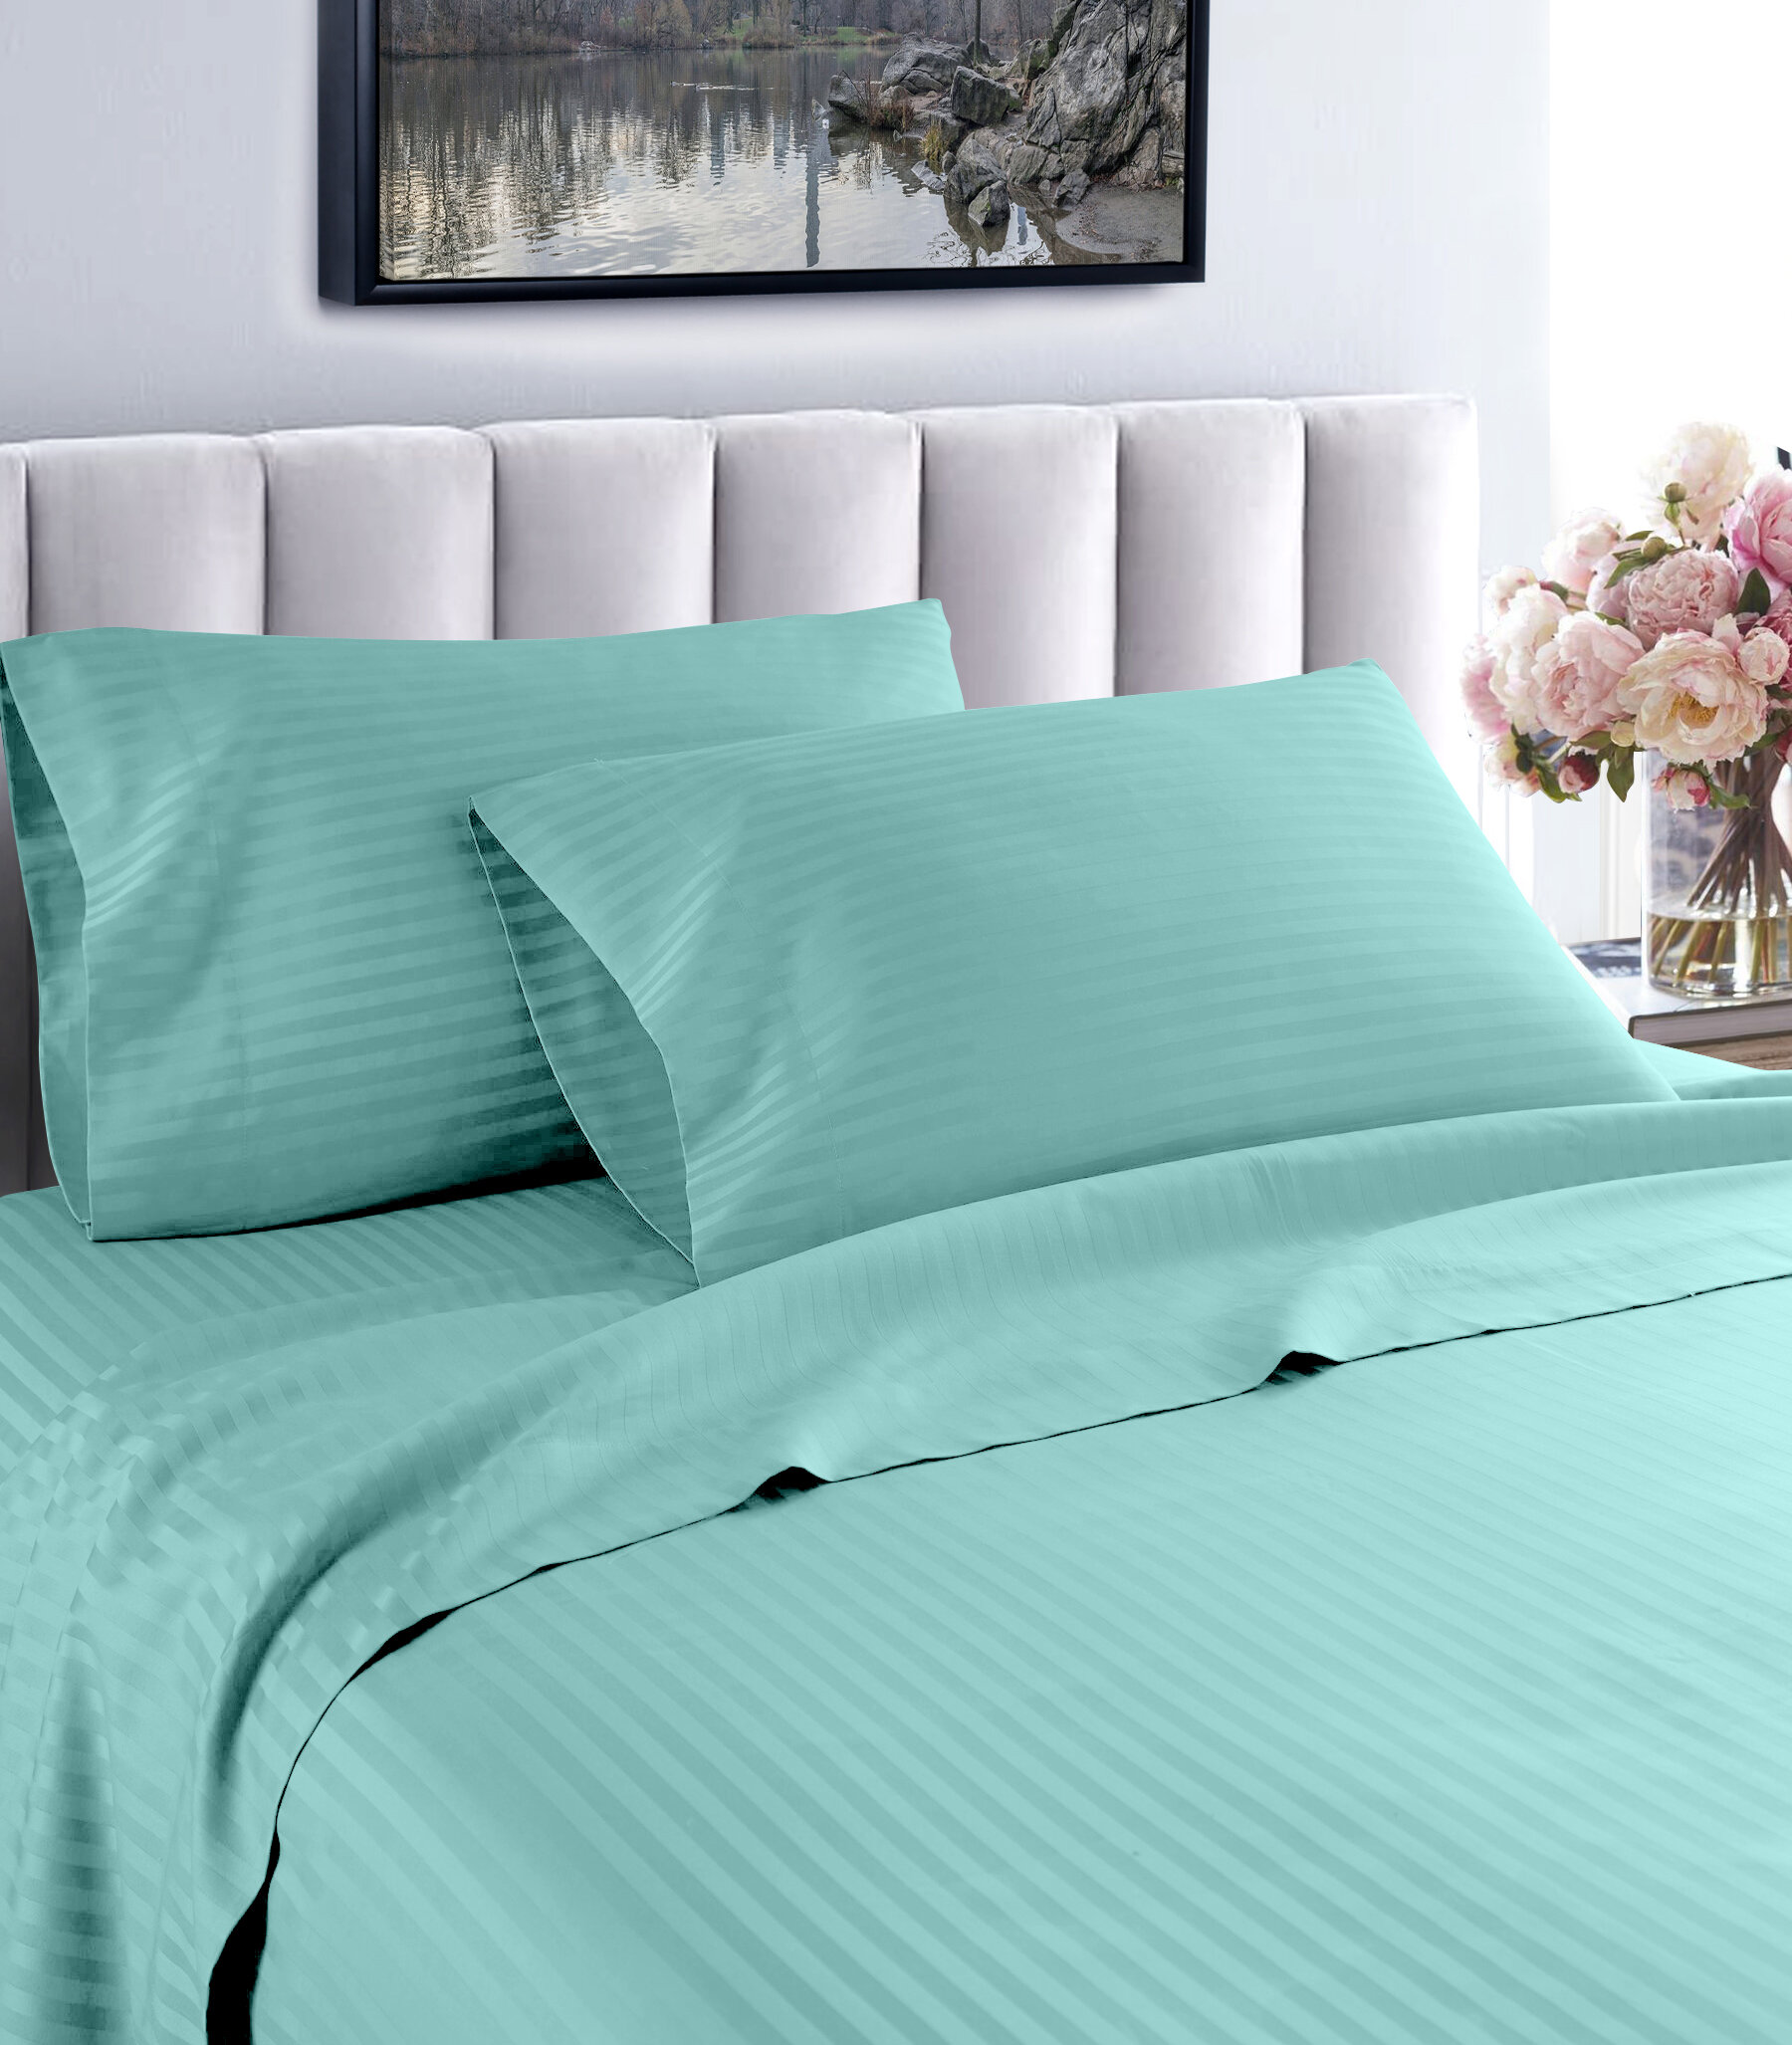 King Sheets Pillowcases You Ll Love In 2021 Wayfair